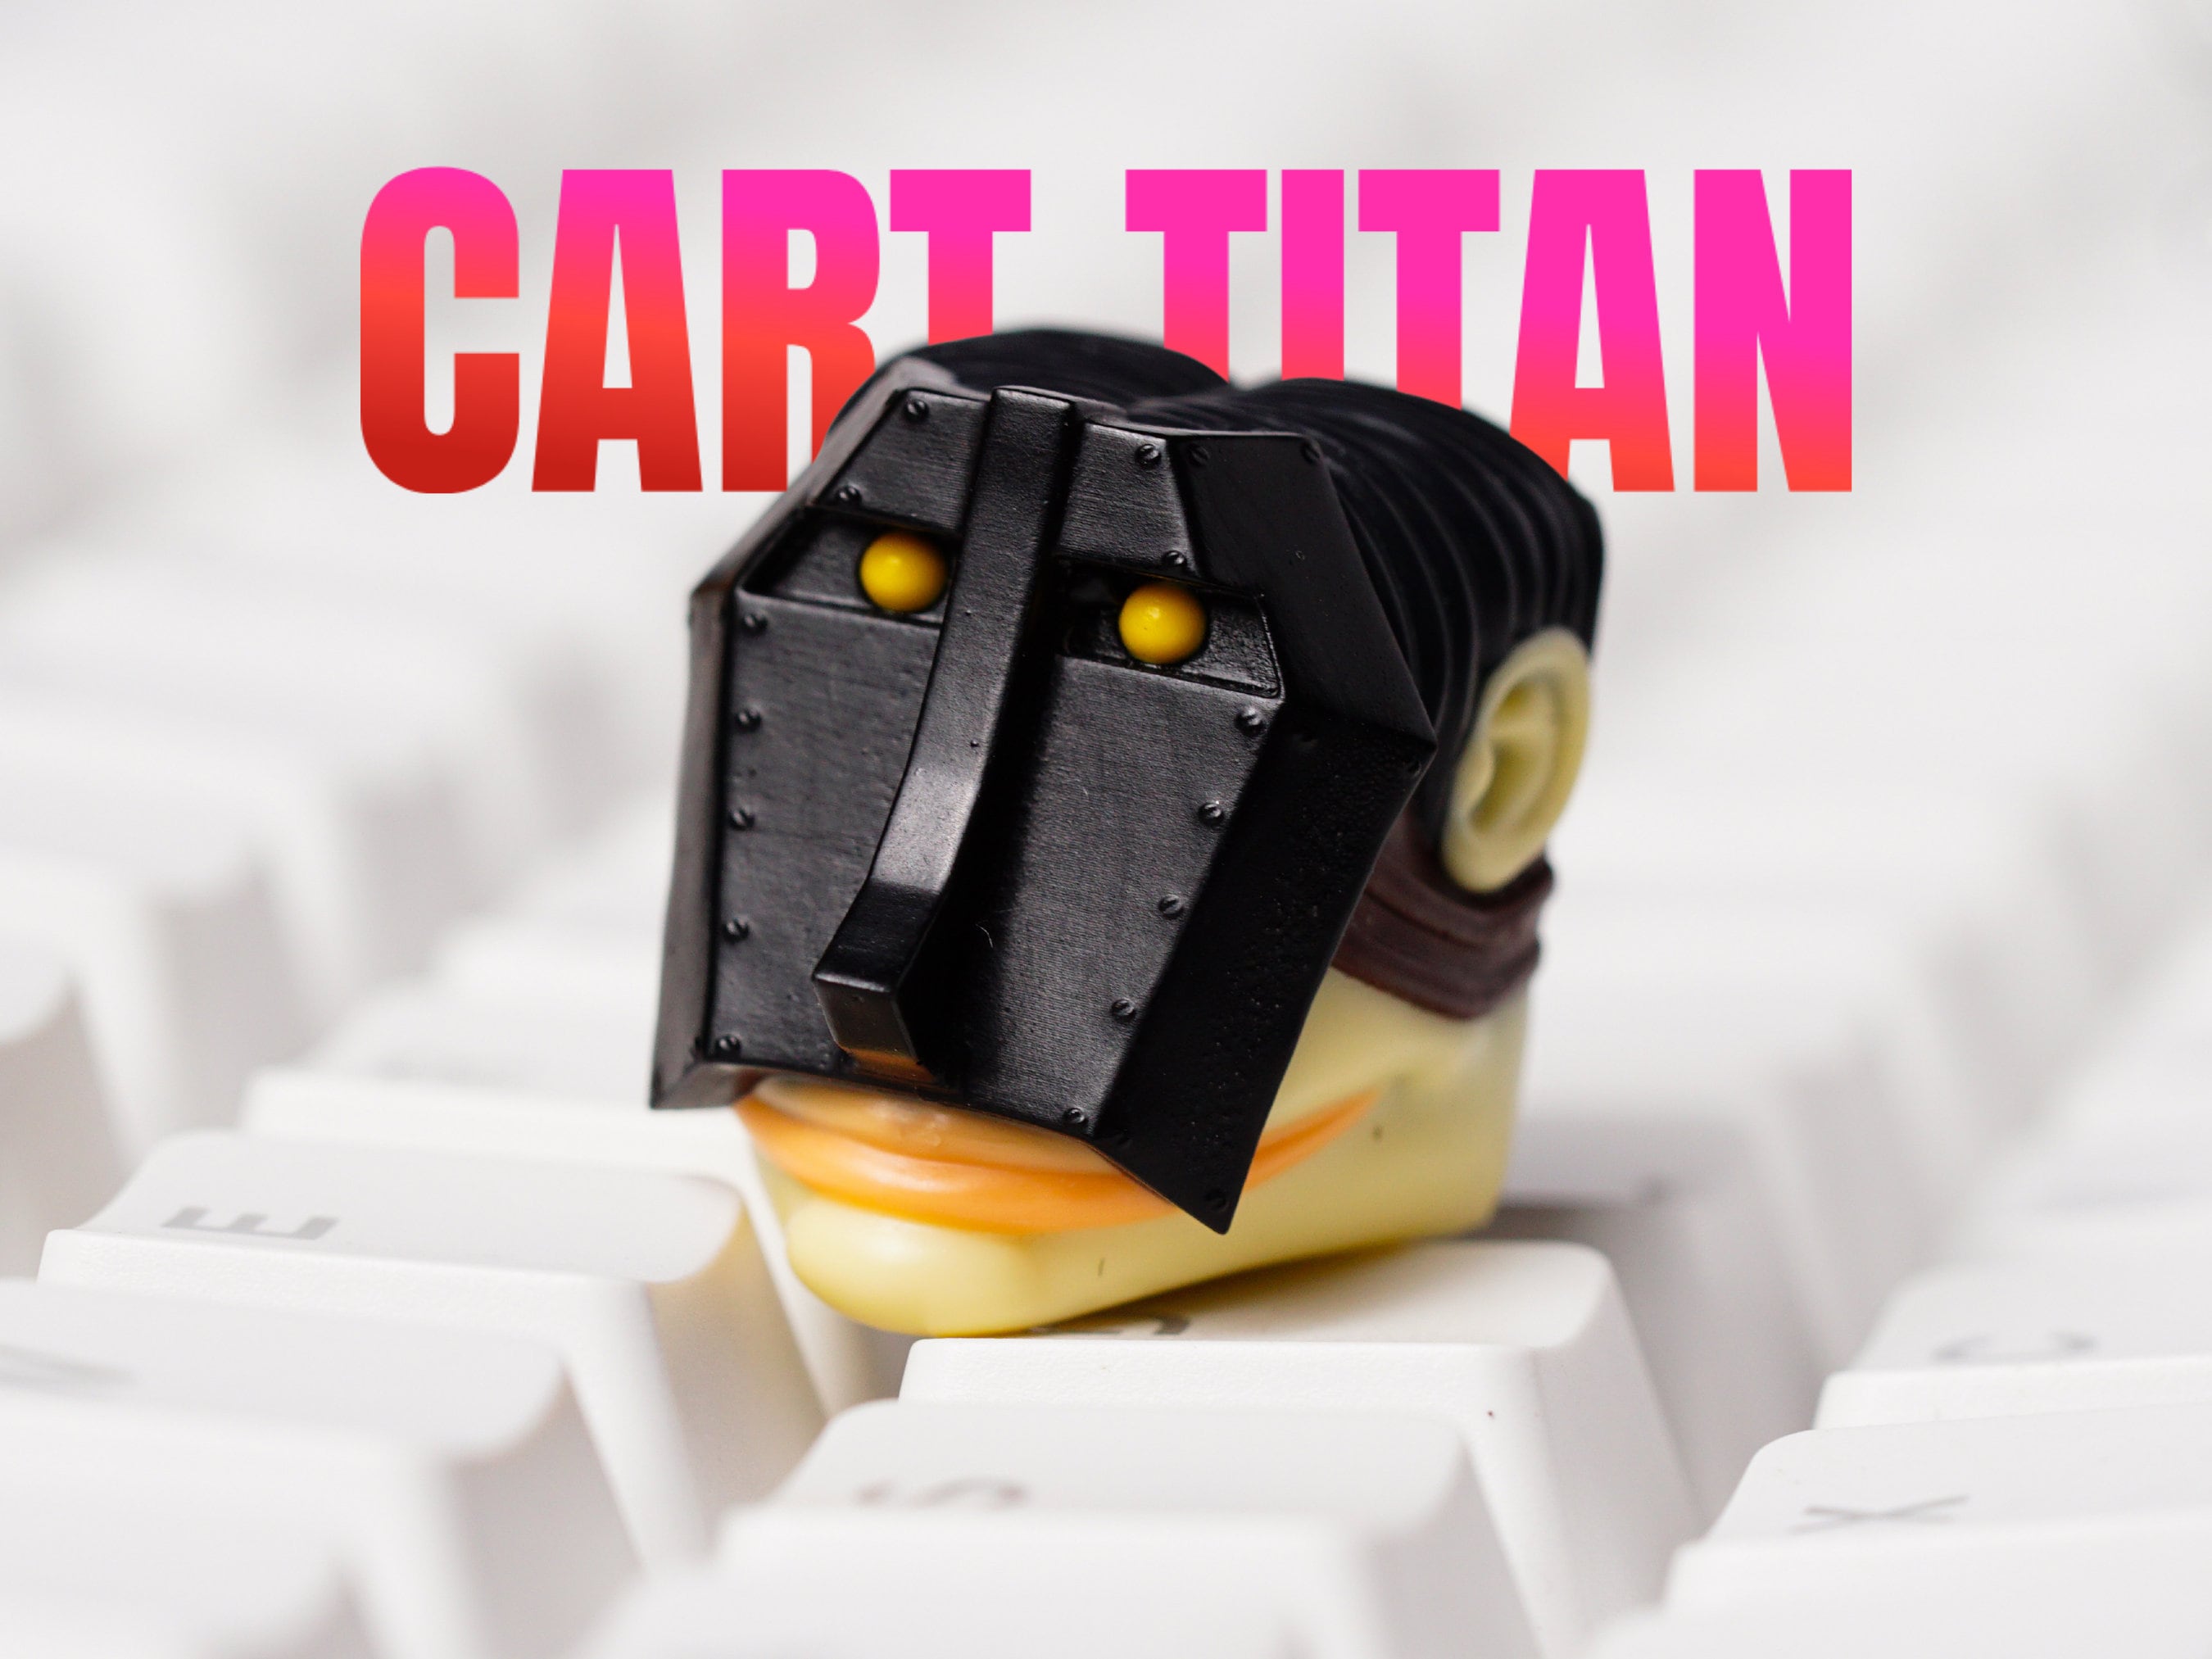 Car.t Ti.tan Keycap, A.O.T Keycap, Anime Keycap, Keycap for MX Cherry Switches Mechanical Keyboard, Handmade Anime Gift